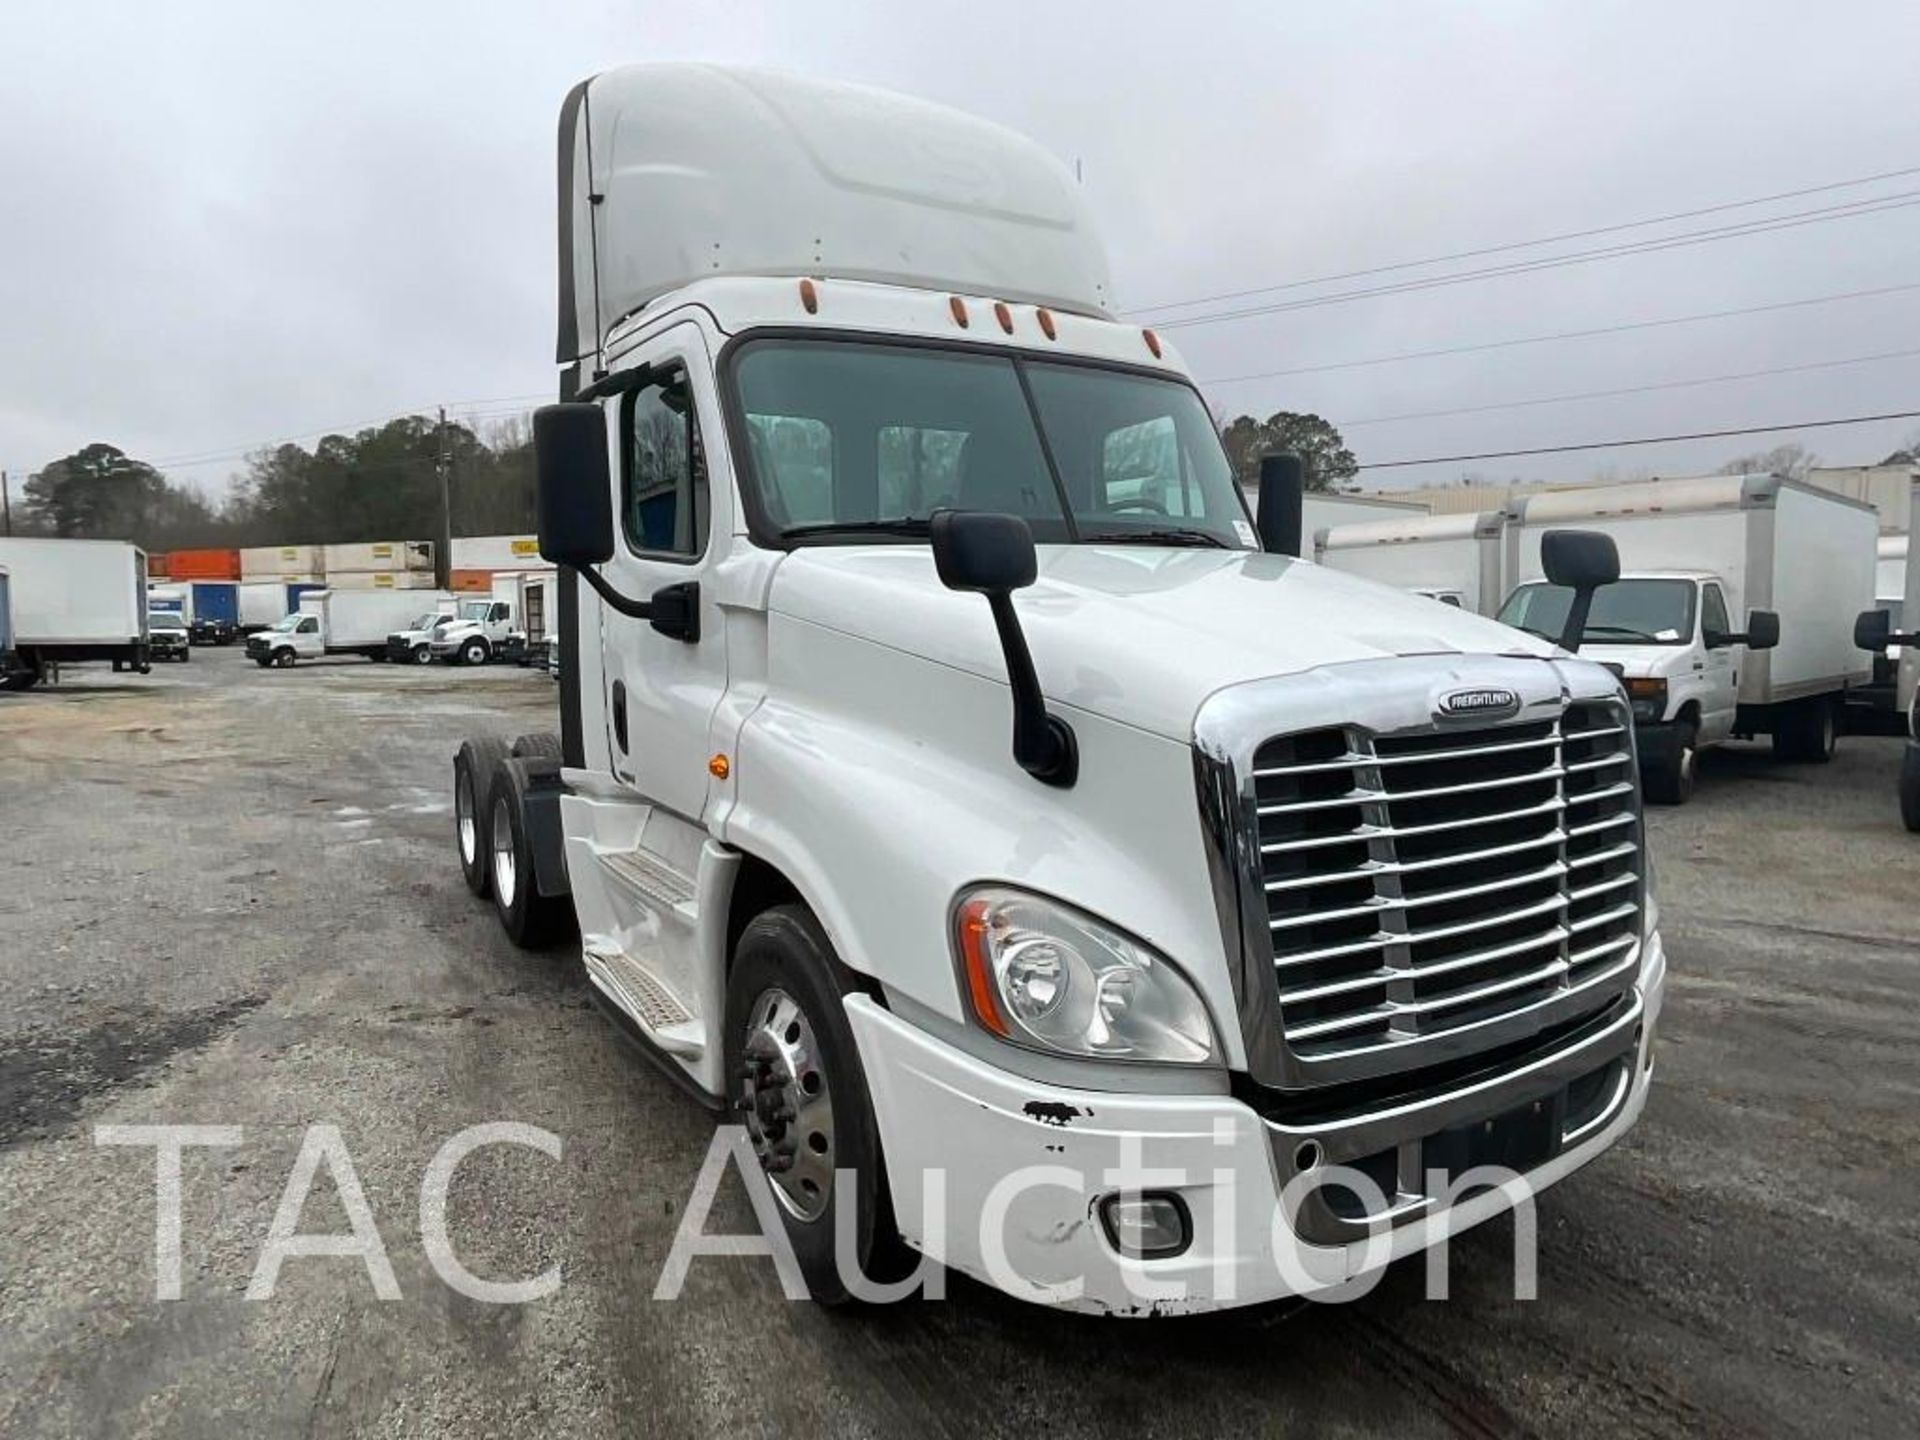 2018 Freightliner Cascadia 125 Day Cab - Image 3 of 58